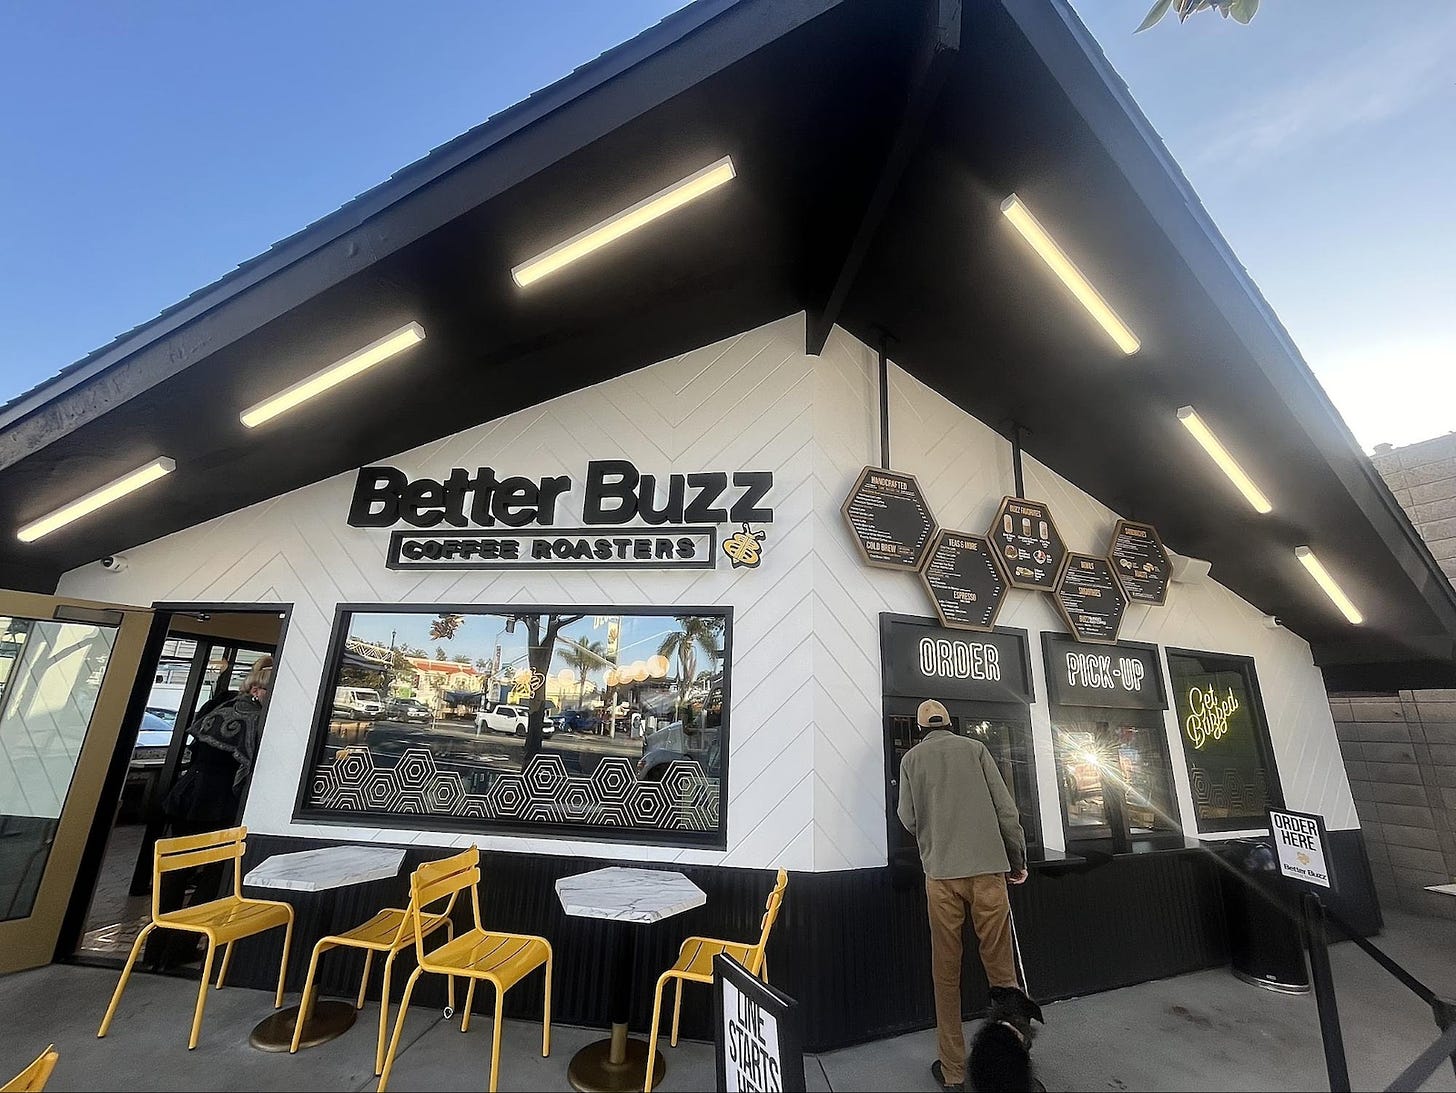 The coffee industry in North County has exploded over the past several years with dozens of shops opening, or expanding their footprint like Better Buzz Coffee Roasters, across the region. Anya Keast photo